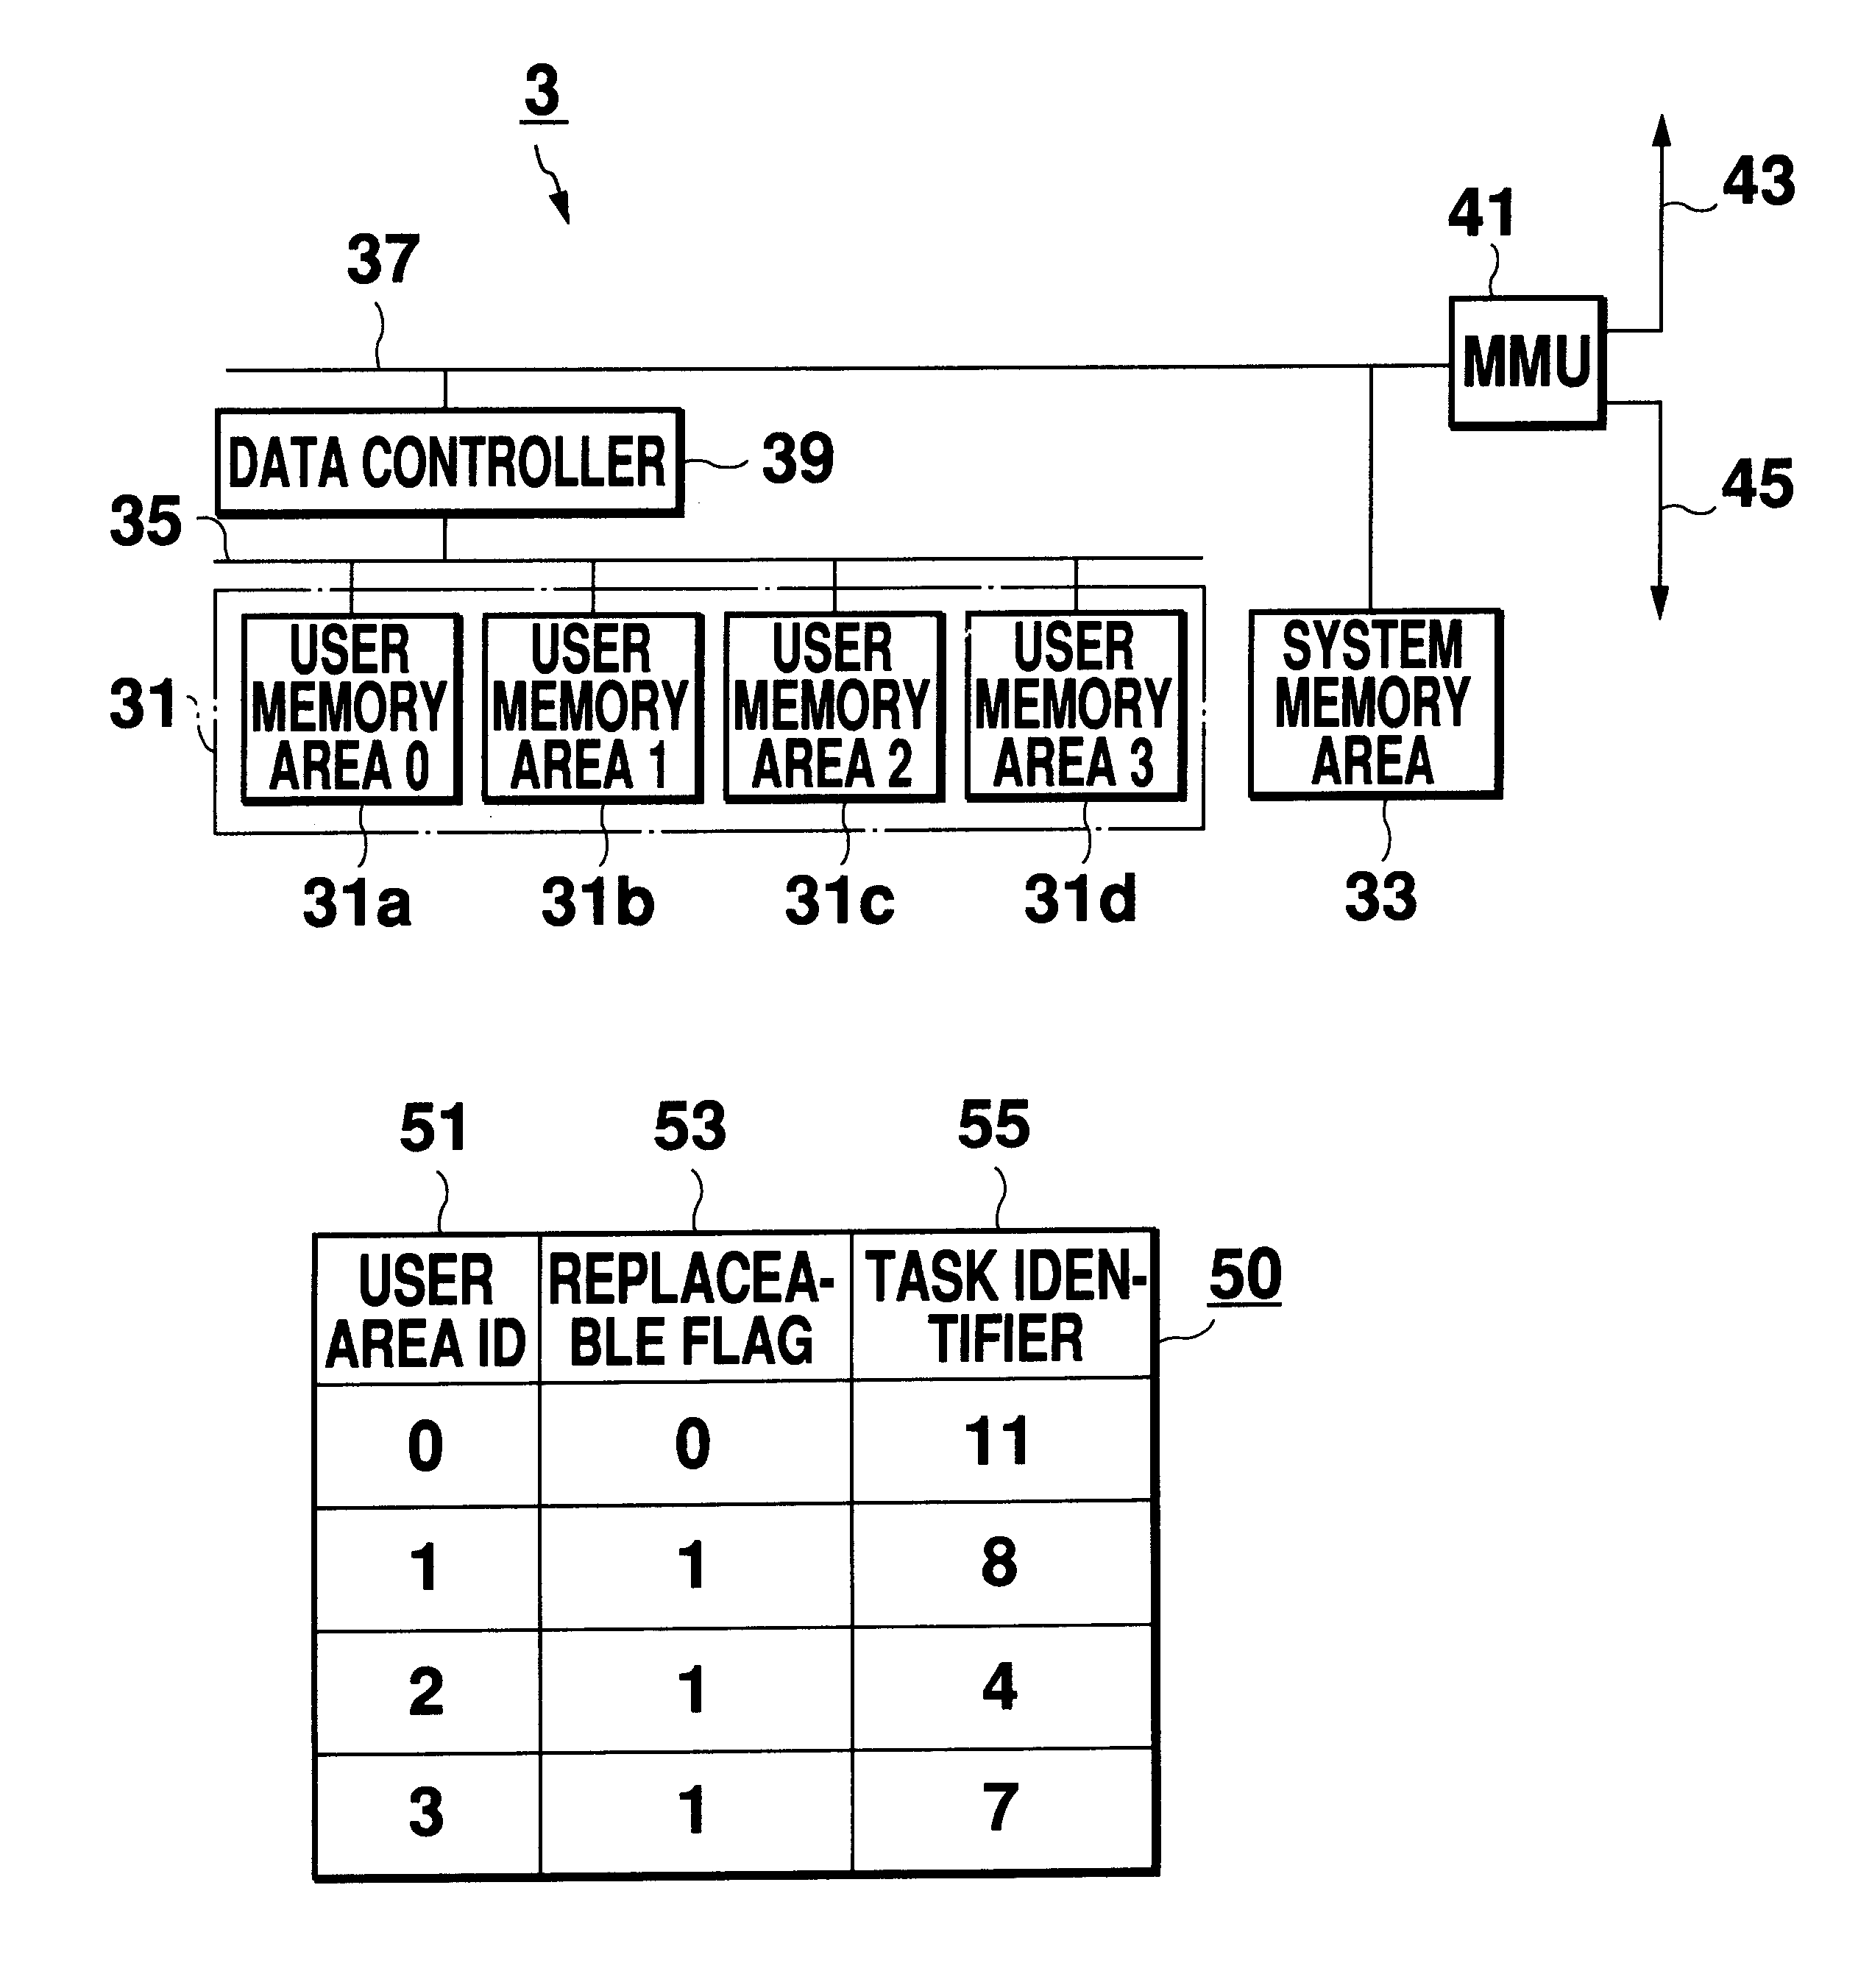 Cache memory system having at least one user area and one system area wherein the user area(s) and the system area(s) are operated in two different replacement procedures